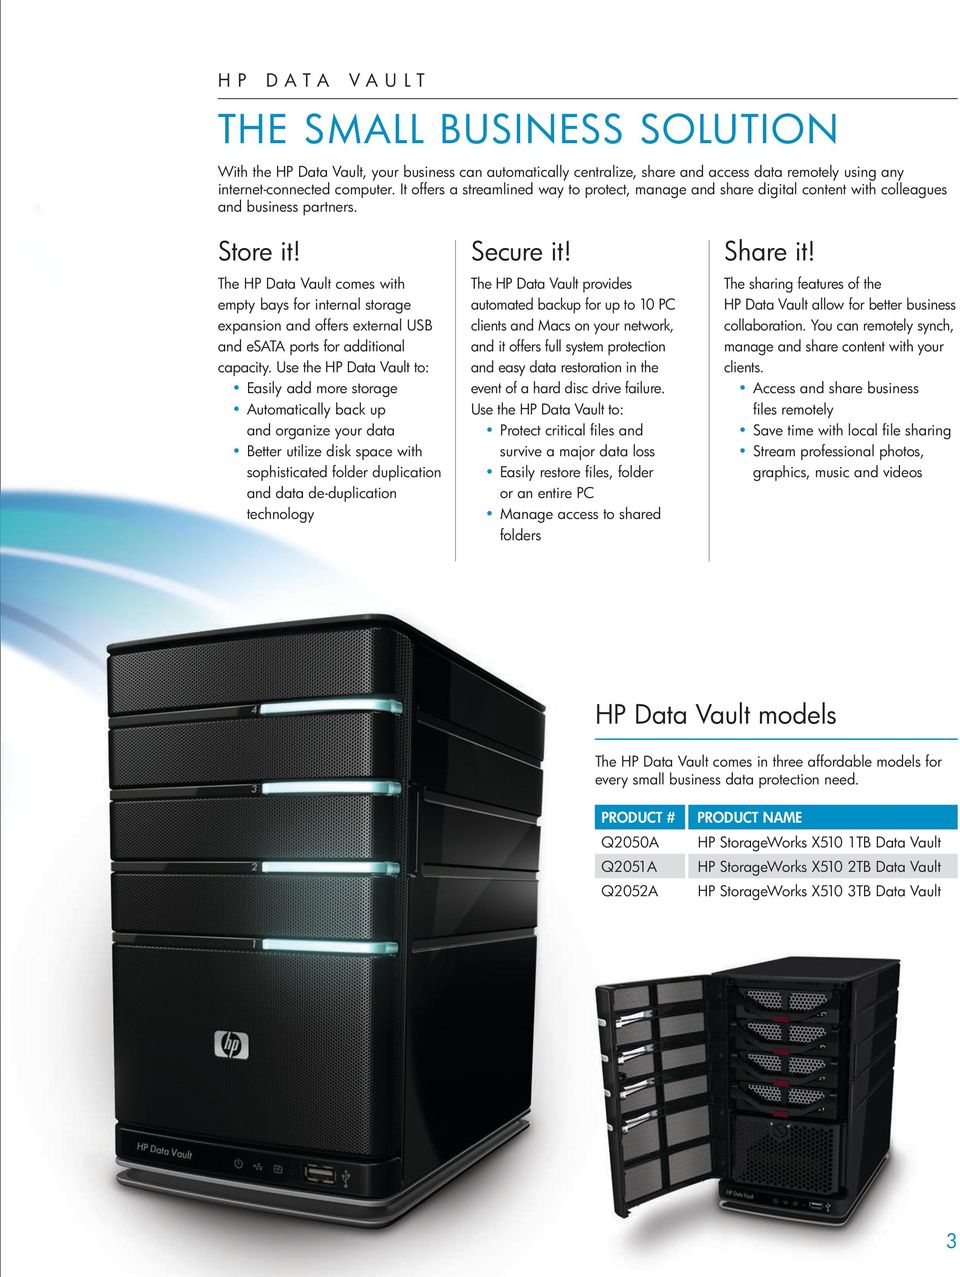 The HP Data Vault comes with empty bays for internal storage expansion and offers external USB and esata ports for additional capacity.